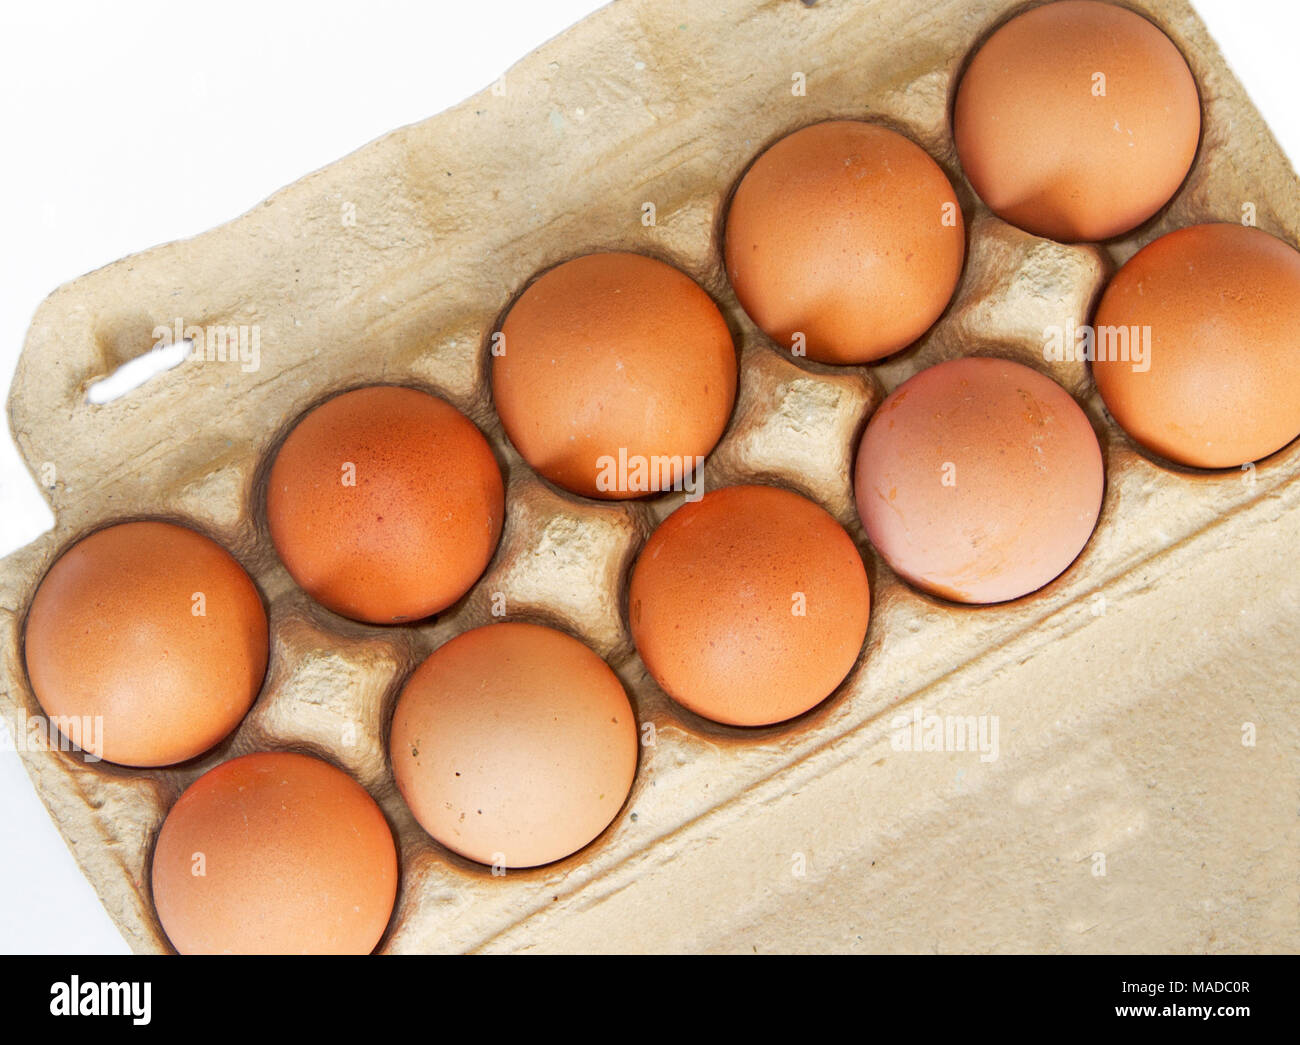 Ten brown chicken eggs in a carboard box Stock Photo